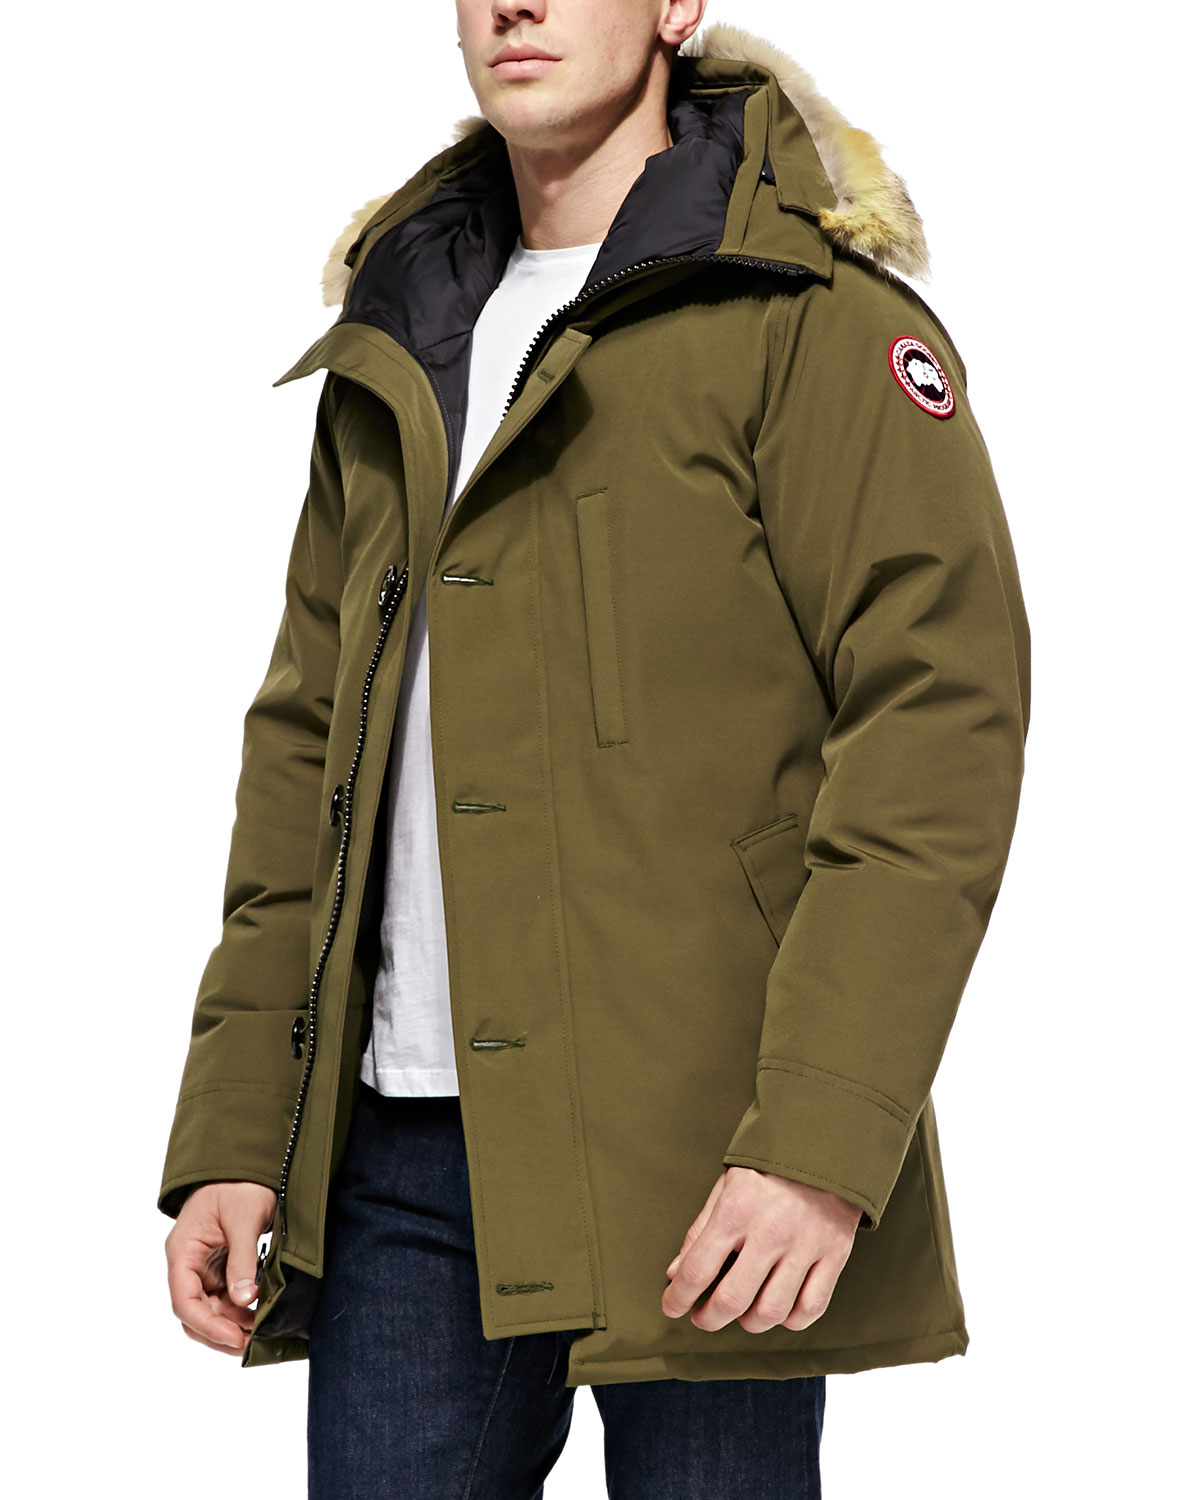 Lyst - Canada Goose Chateau Arctic-Tech Parka With Fur Trim in Green ...